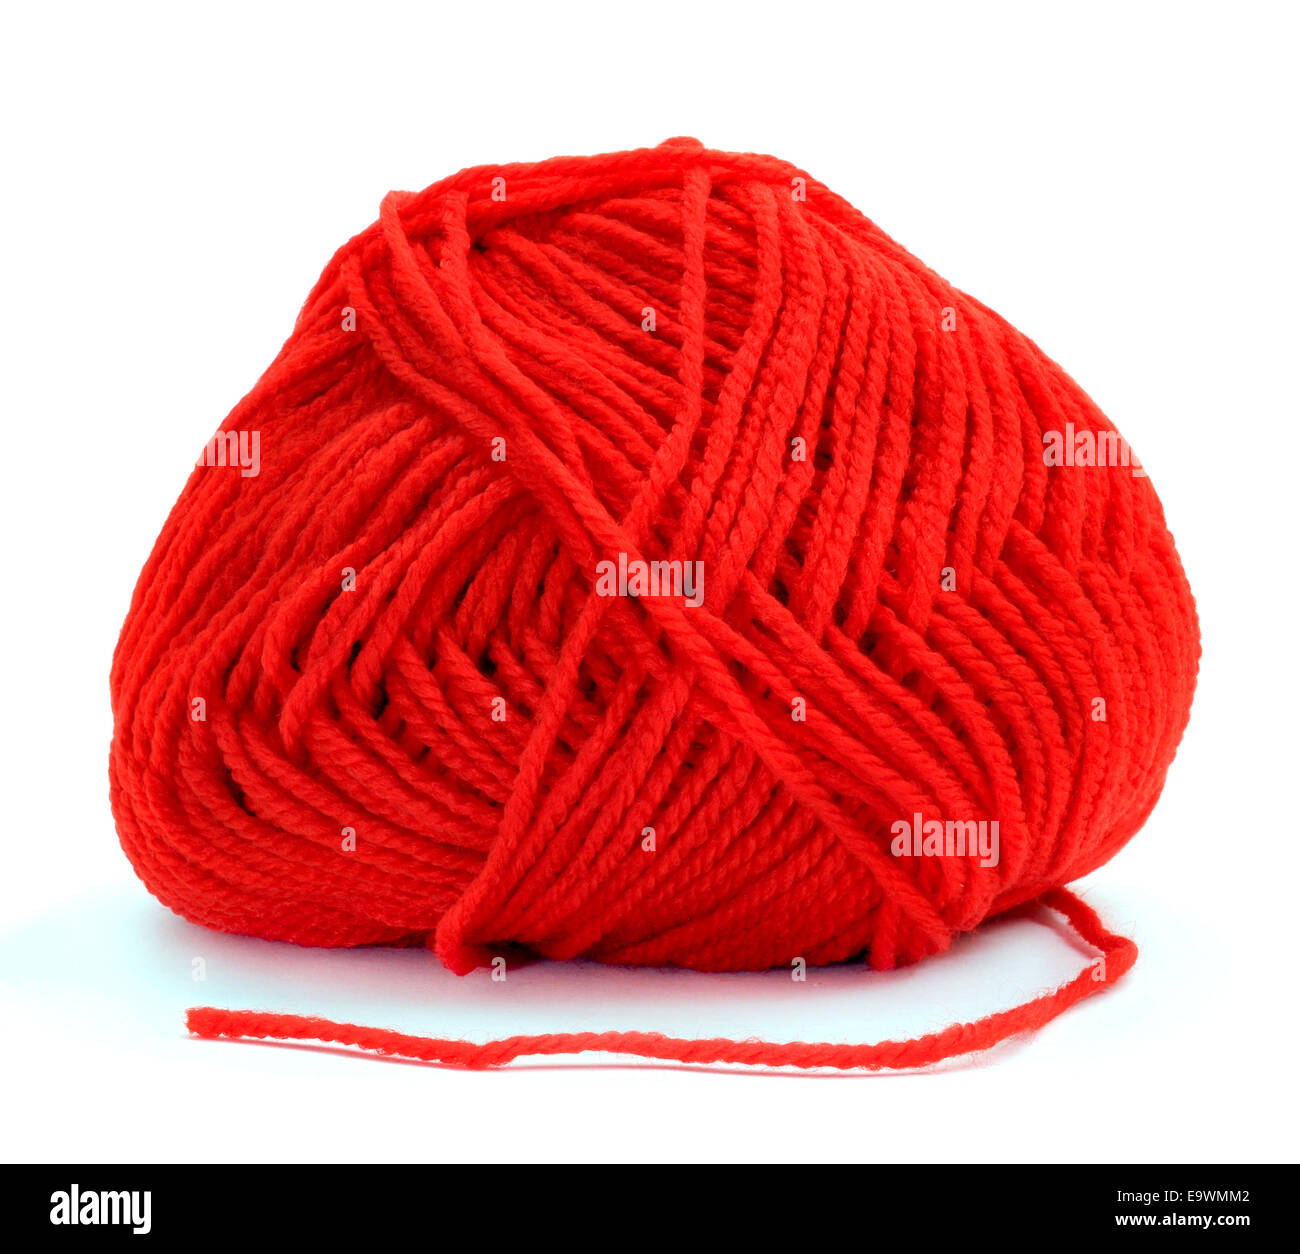 a ball of red yarn for knitting on a white background Stock Photo